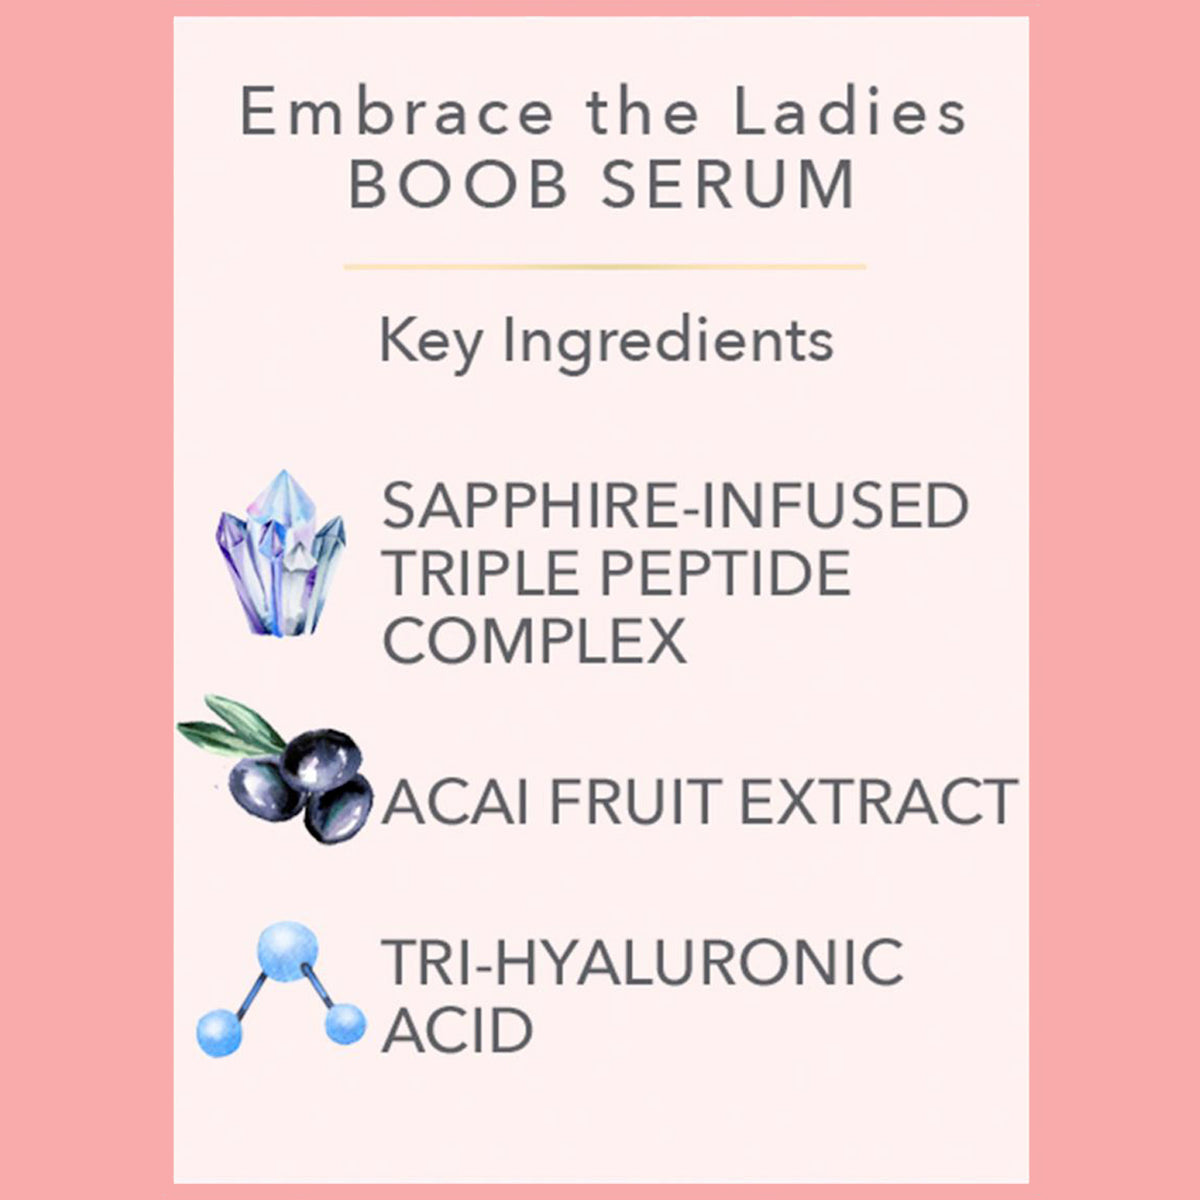 Embrace the Ladies Concentrated Firming Neck, Dec & Boob Serum